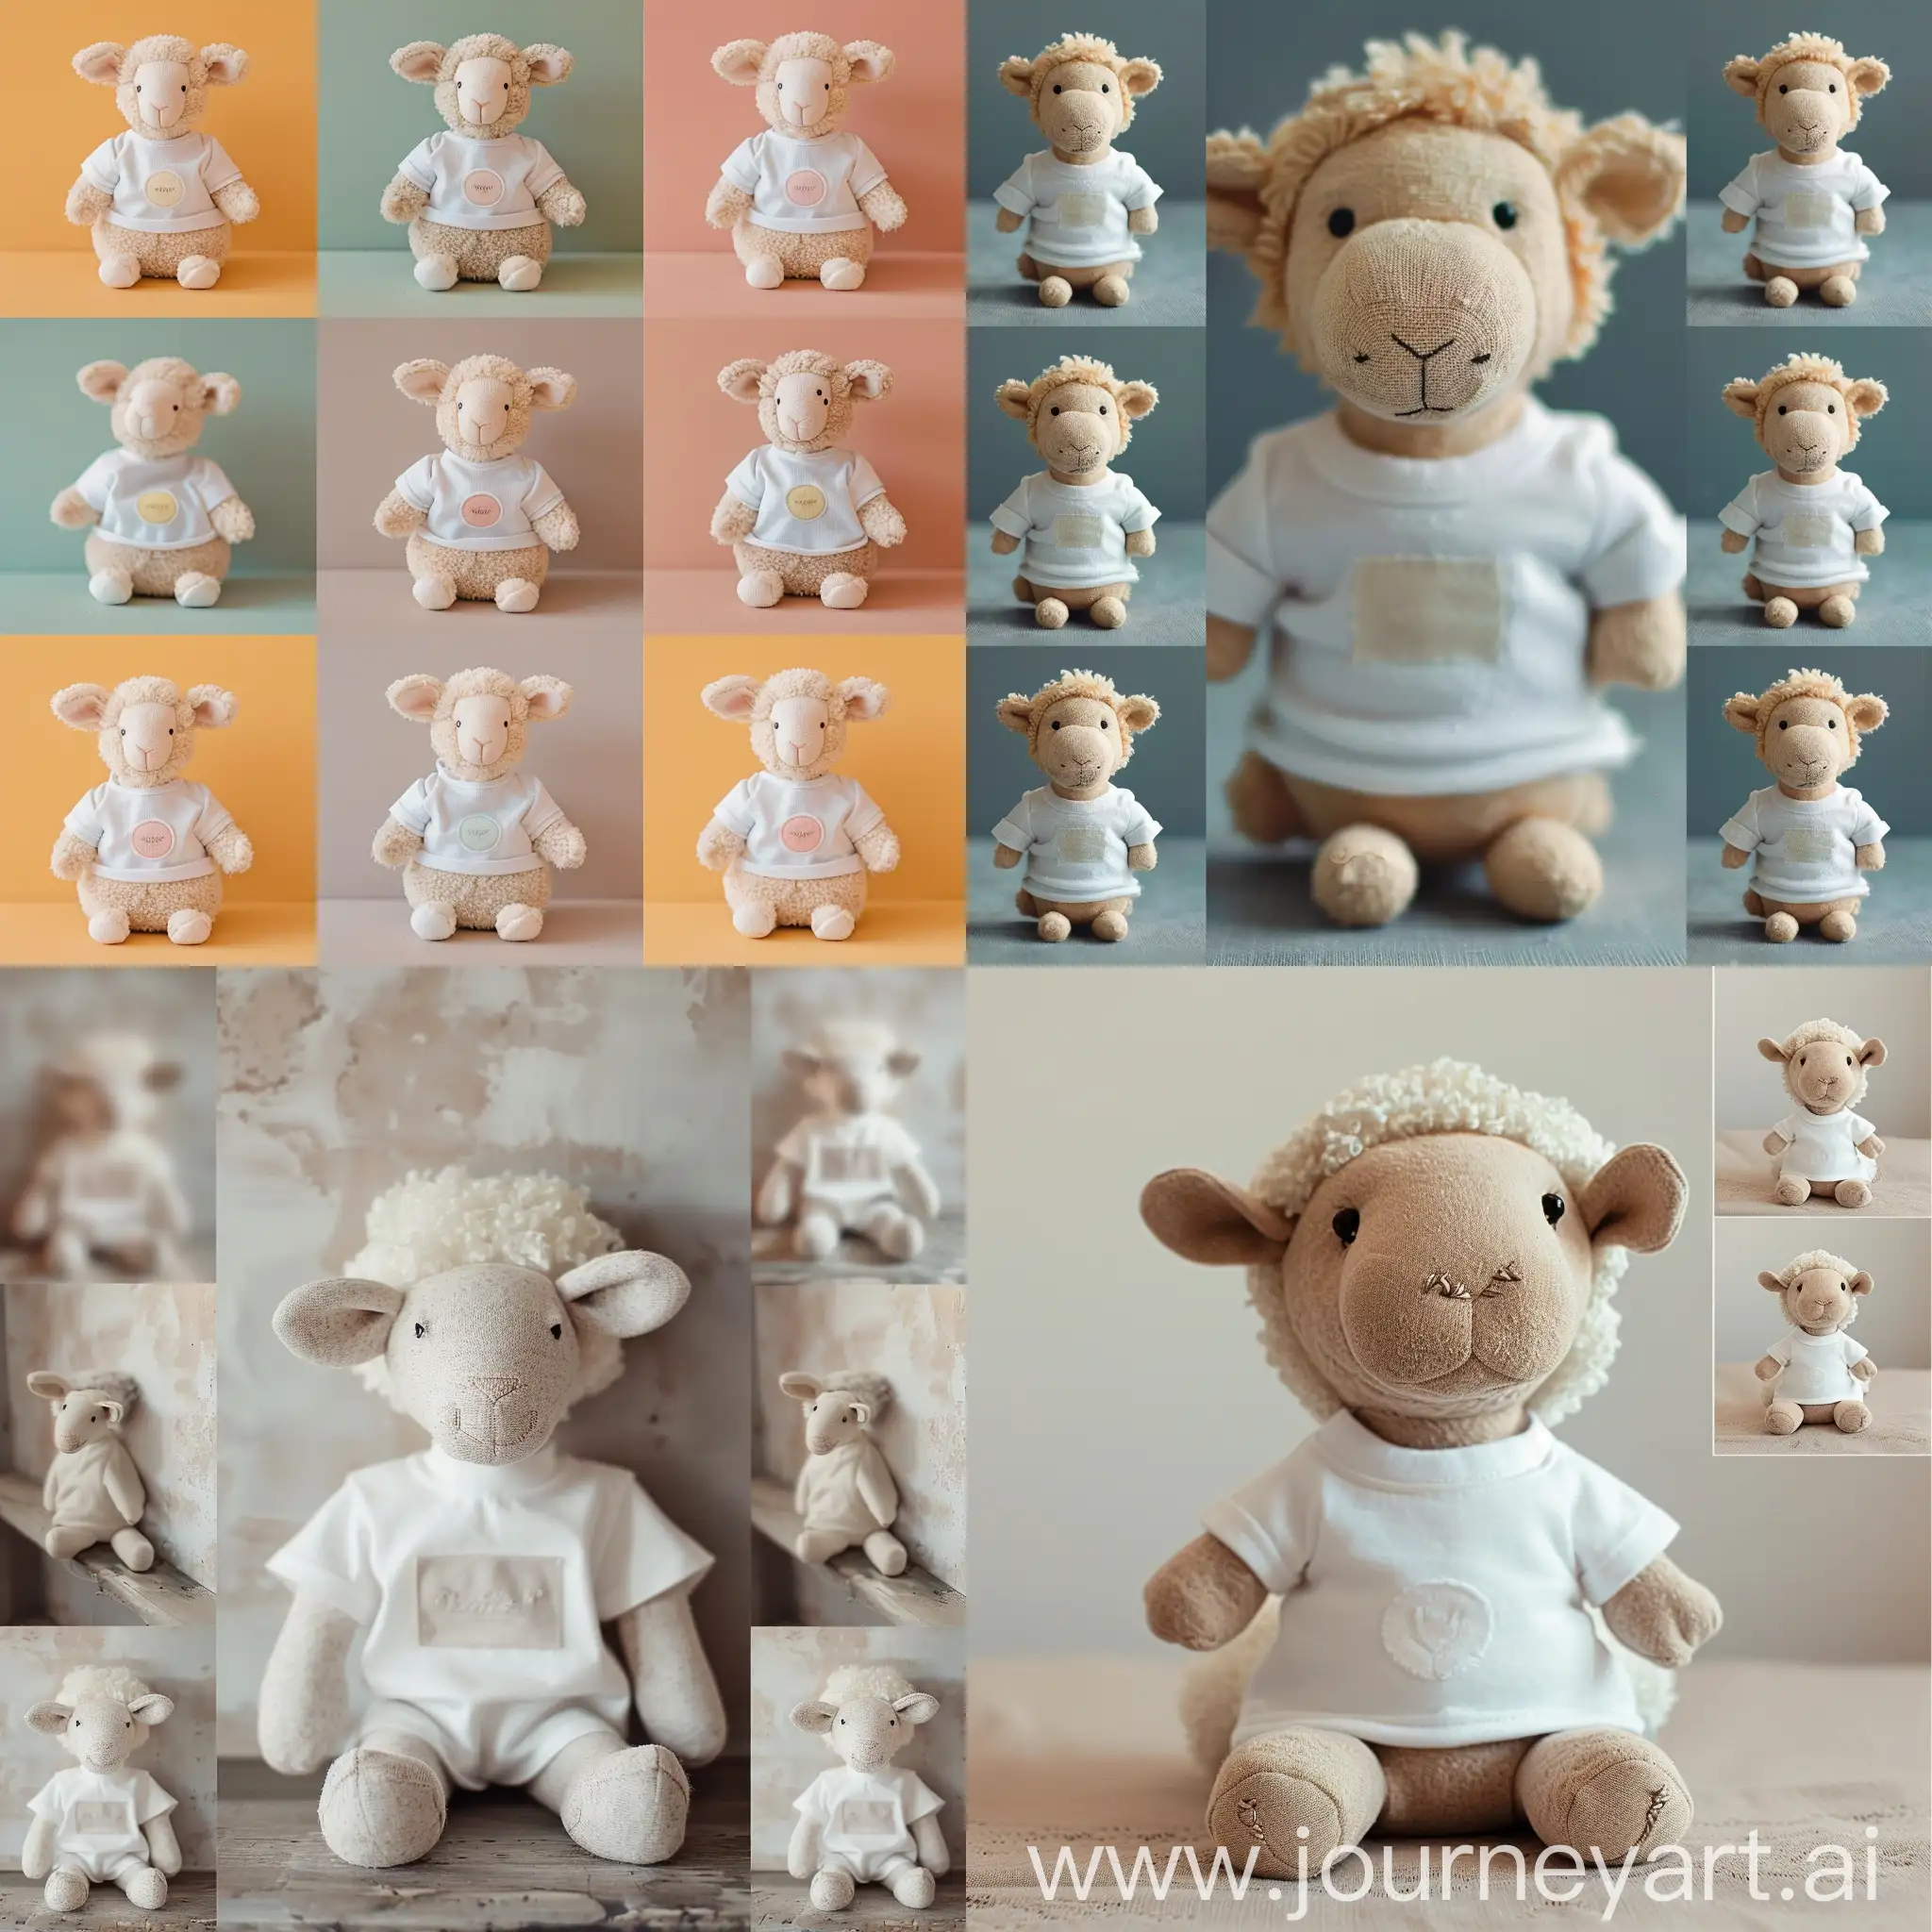 hight quality, super detail, cute stuffed sheep in white t-shirt,Beautiful, gentle, poetic lighting, gentle pastel background,many different perspectives